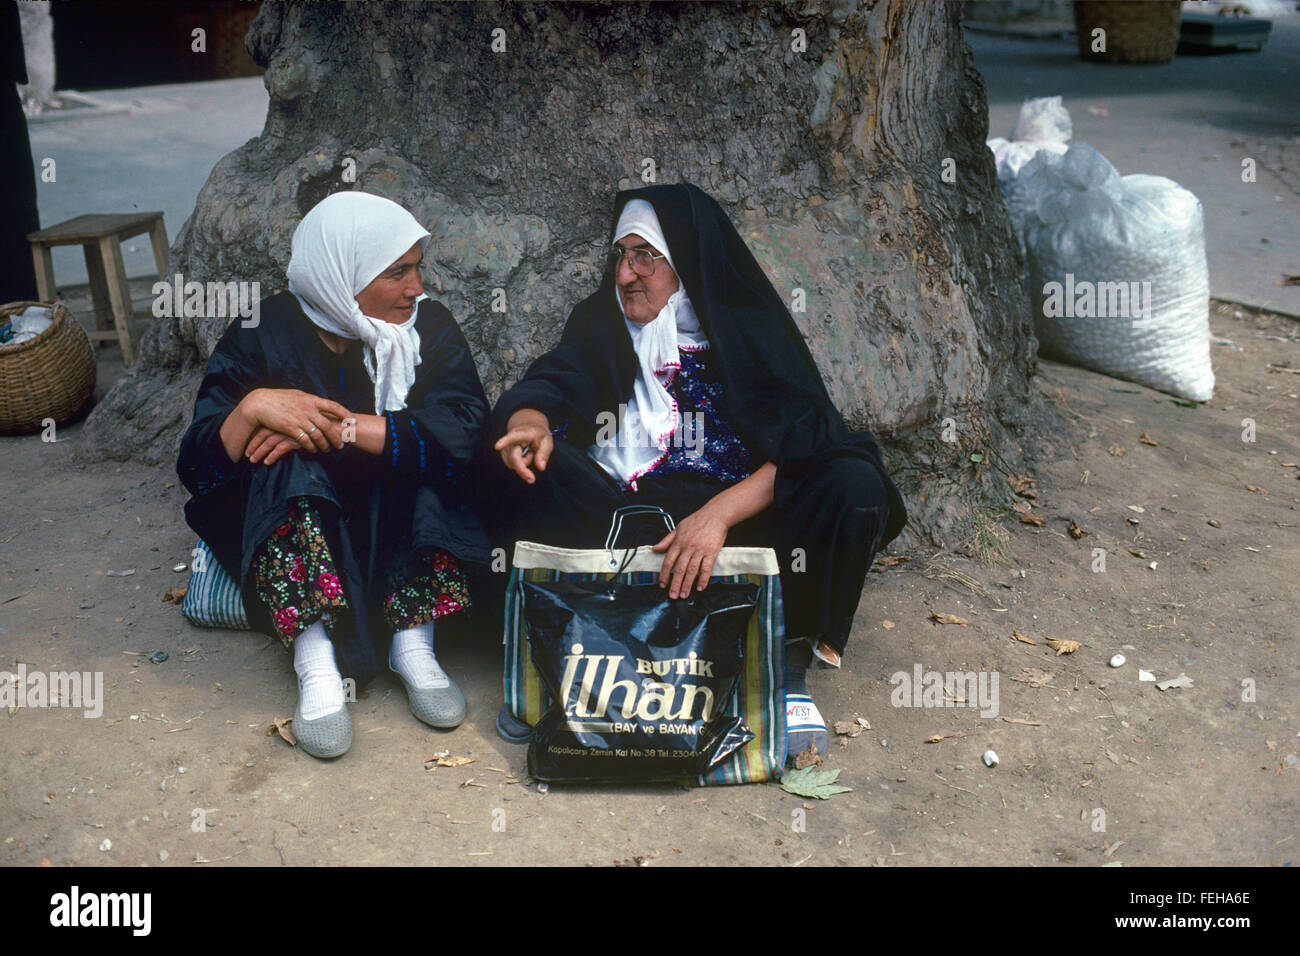 Two Generations of Turkish Woman. A Traditional Turkish Woman Dressed in Traditional Dress Talks with a Younger Turkish Girl or Young Woman Beneath a Plane Tree Bursa Turkey Stock Photo